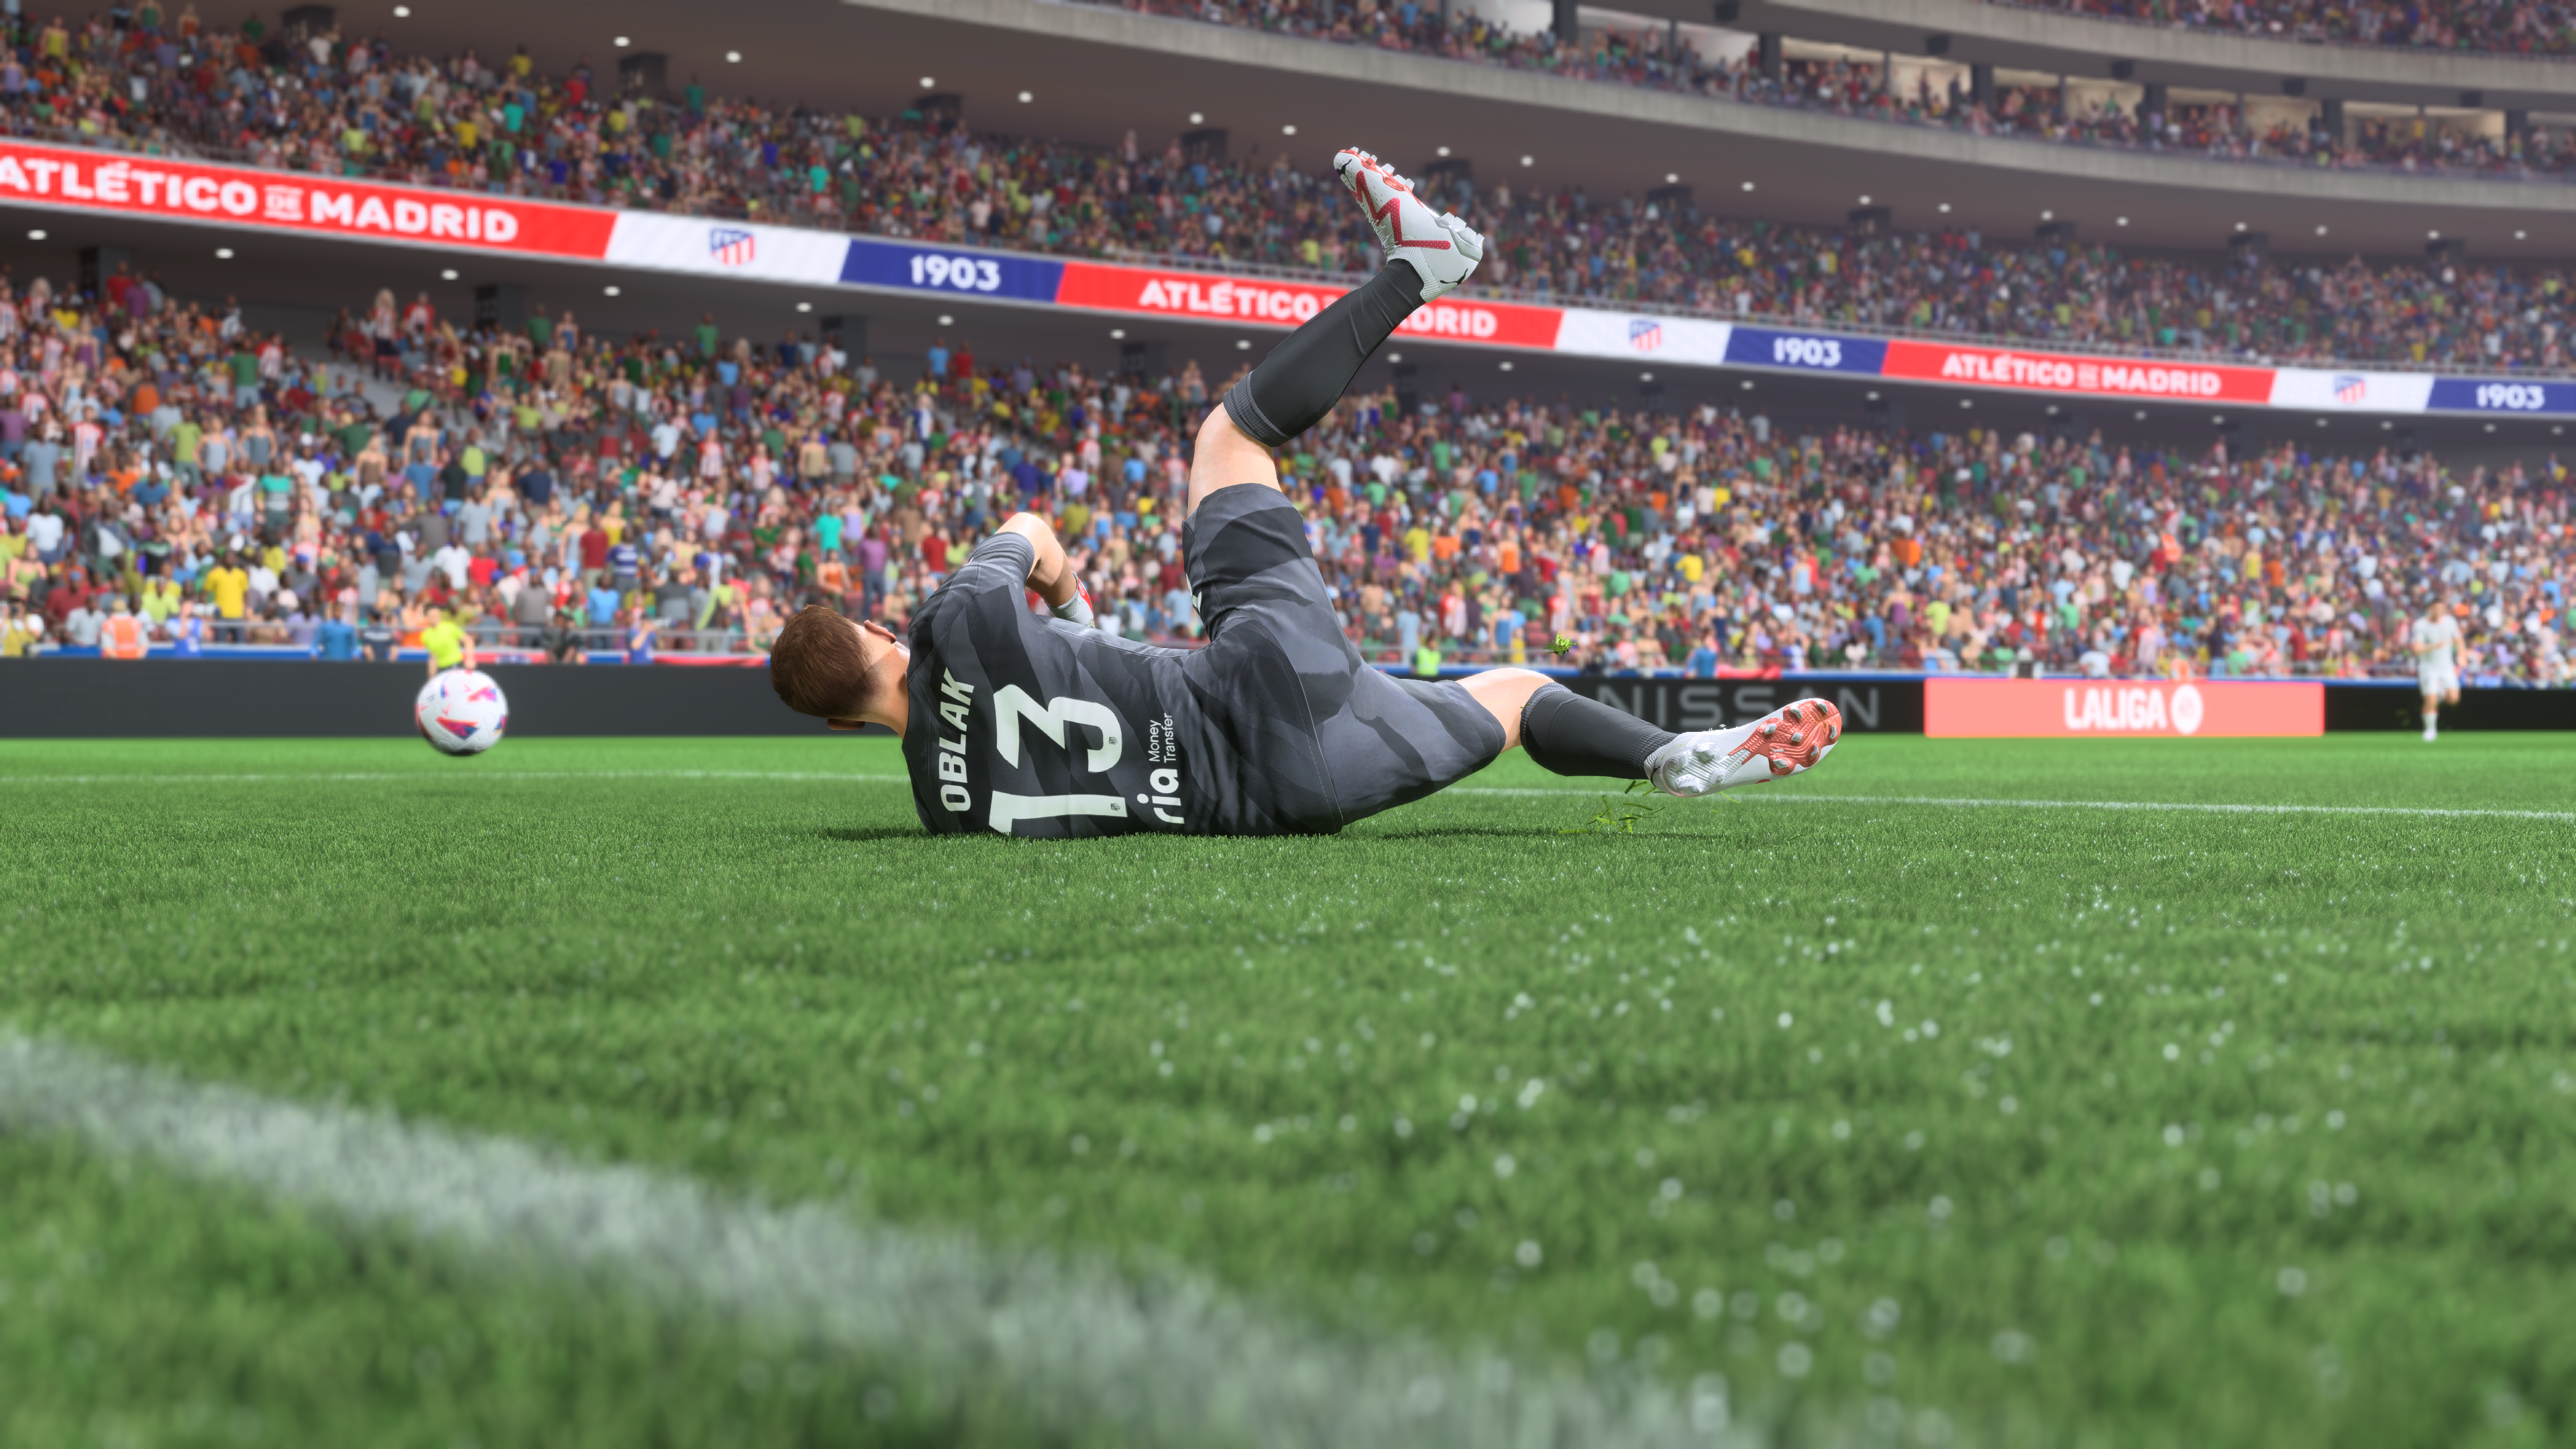 FIFA 23 Patch #6 Available Now - Patch Notes - Operation Sports